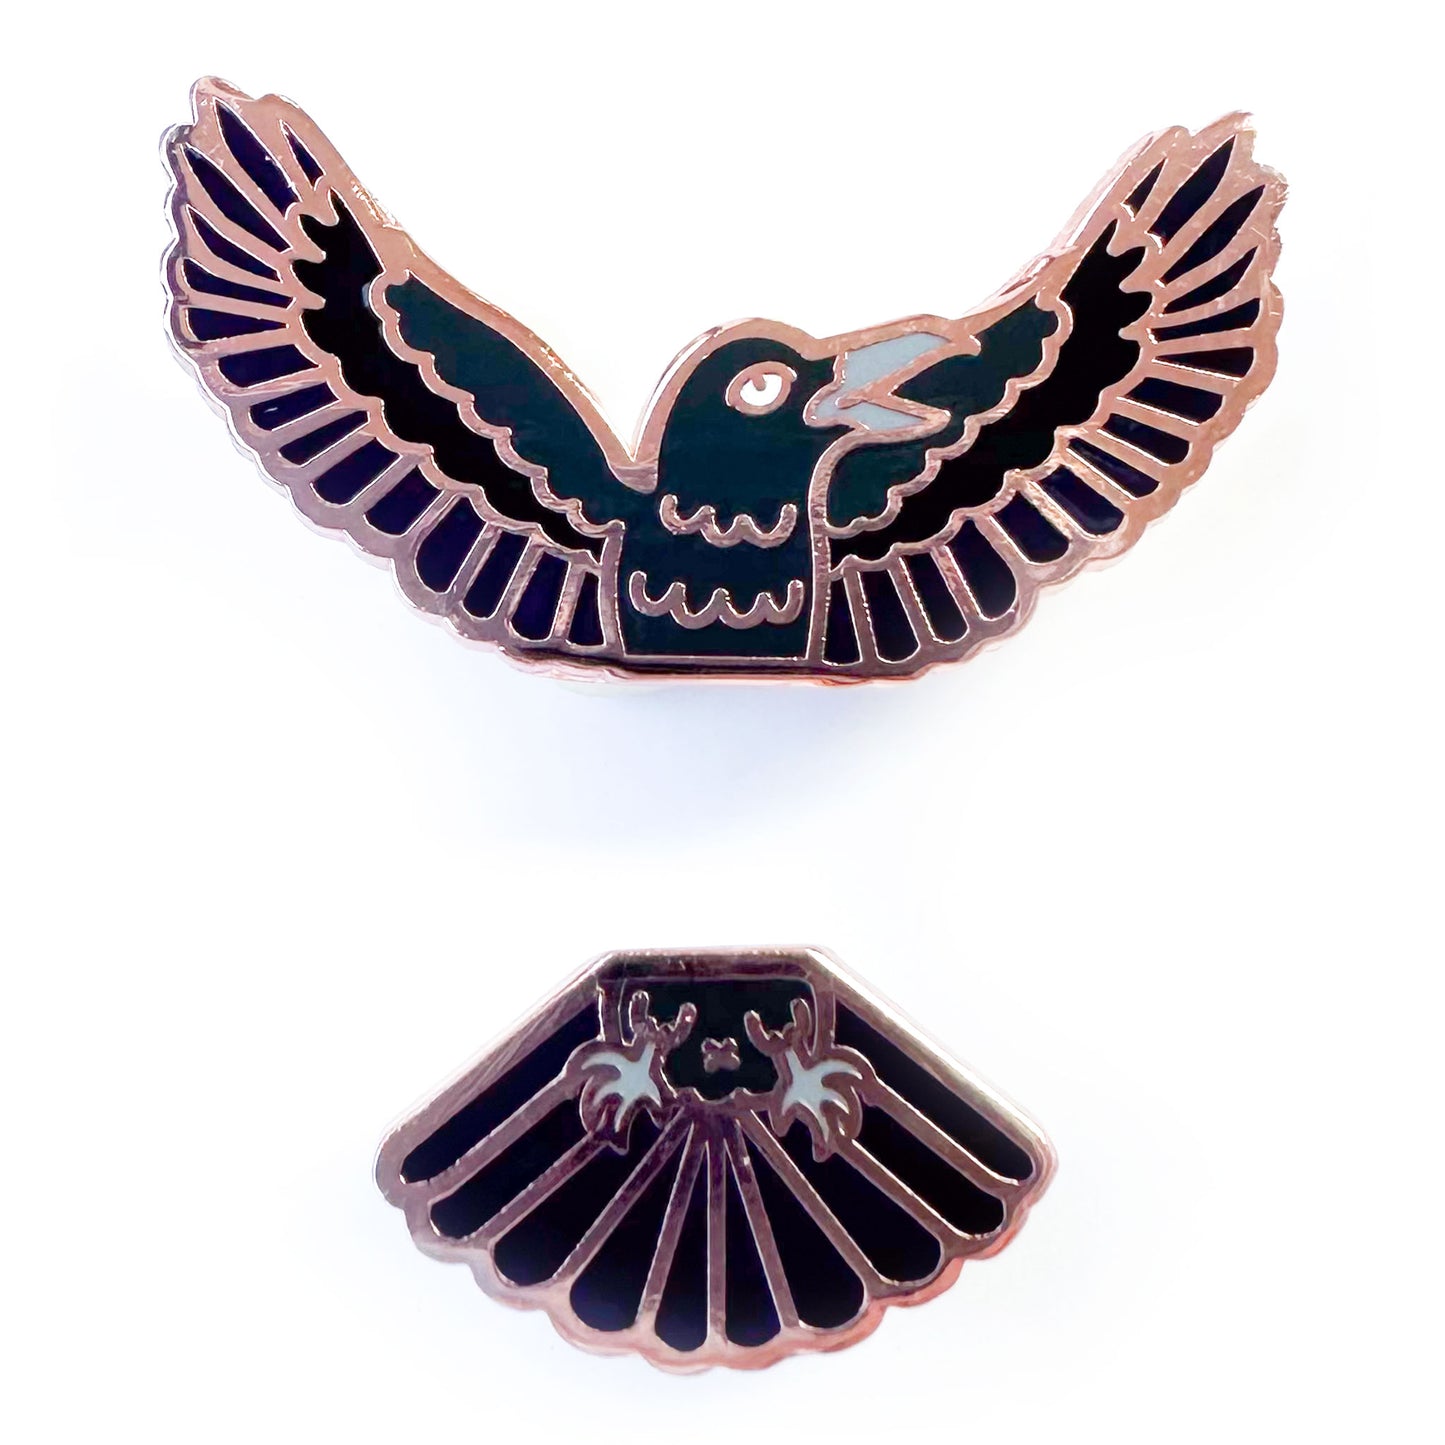 Two enamel pins that come together in the middle to form a raven, one pin is the head and wings and one pin is the tail feathers and feet. 